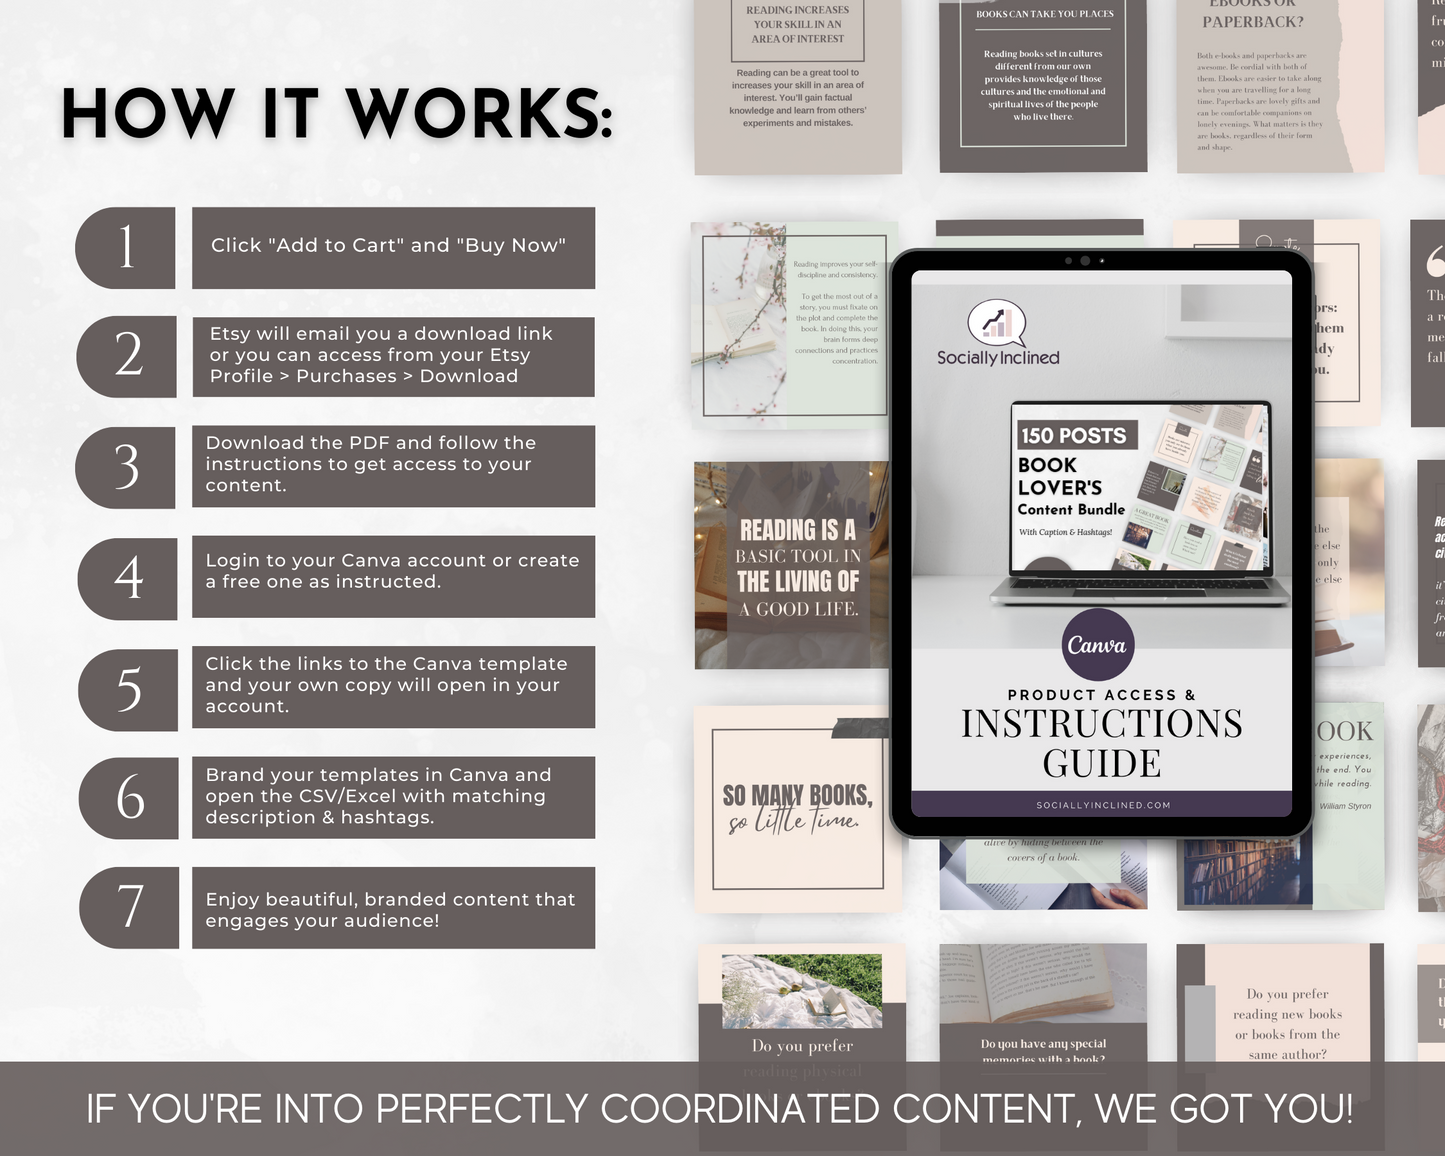 Instruction guide for creating engaging social media content using the Book Lover's Social Media Post Bundle with Canva Templates from Socially Inclined.